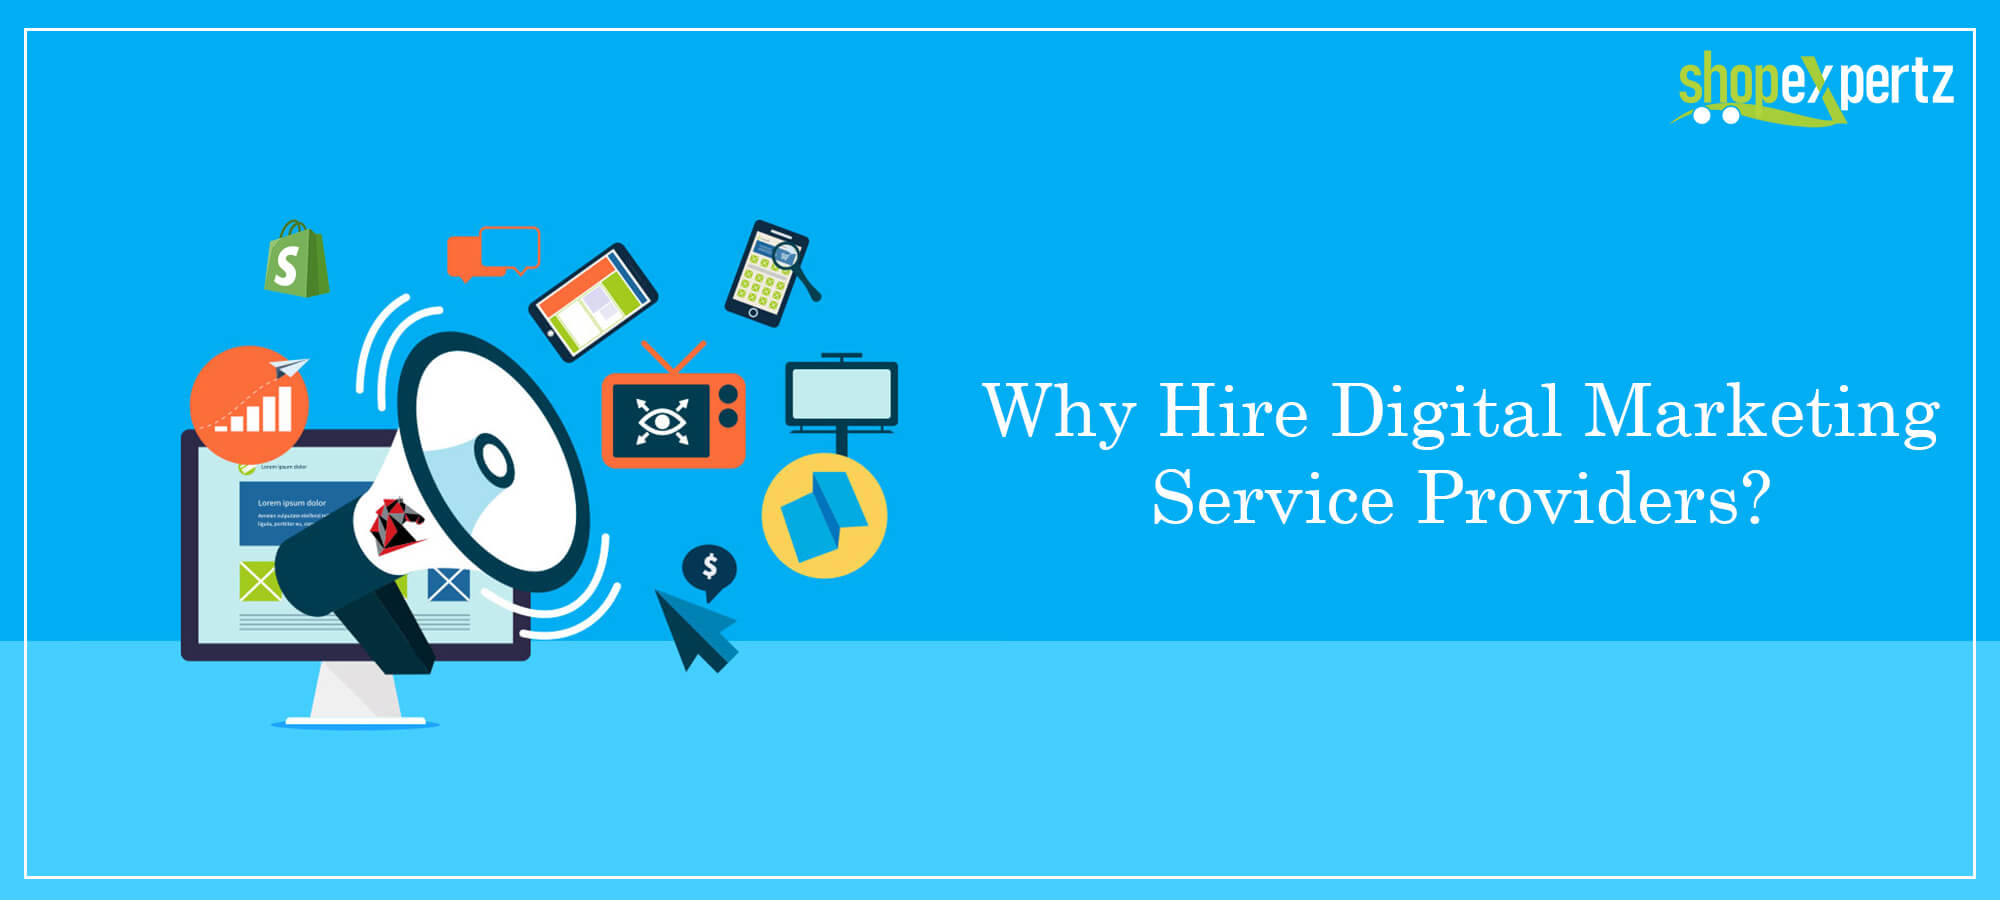 Why Hire Digital Marketing Service Providers?